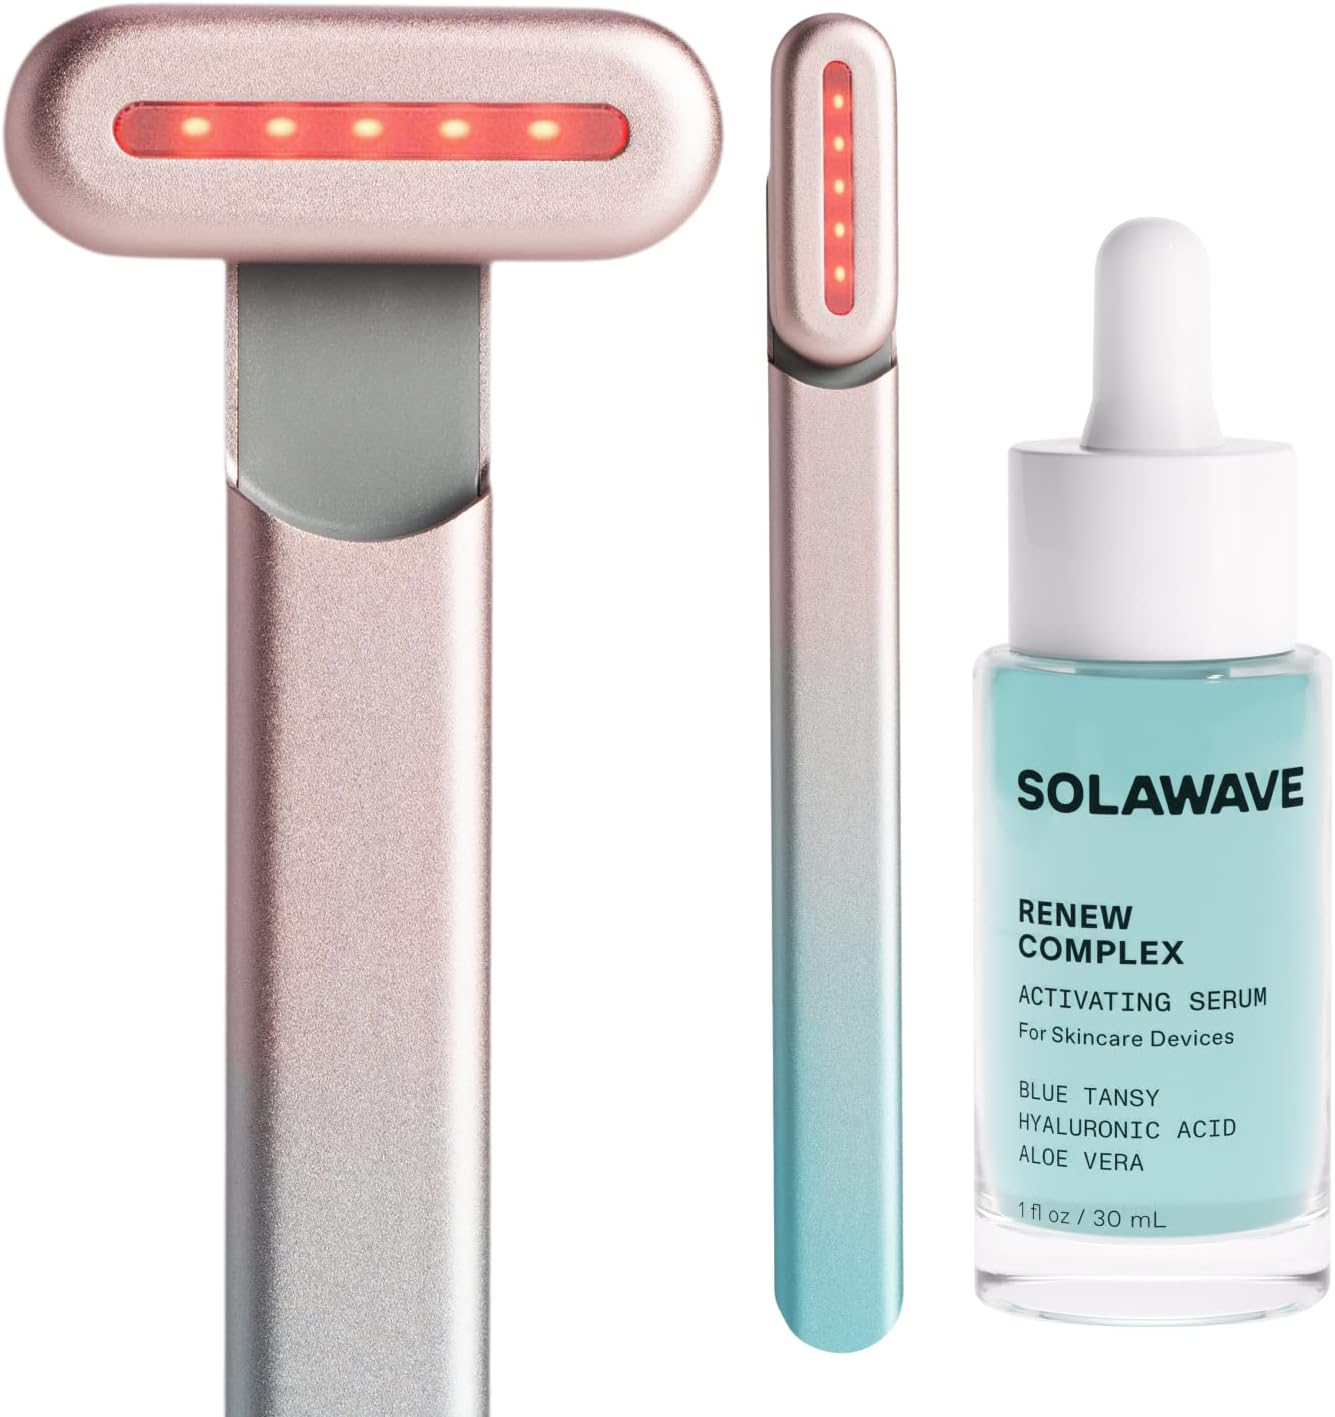 Roll over image to zoom in SolaWave 4-in-1 Facial Wand and Renew Complex Serum Bundle with a wand in pink and blue and a bottle of serum.